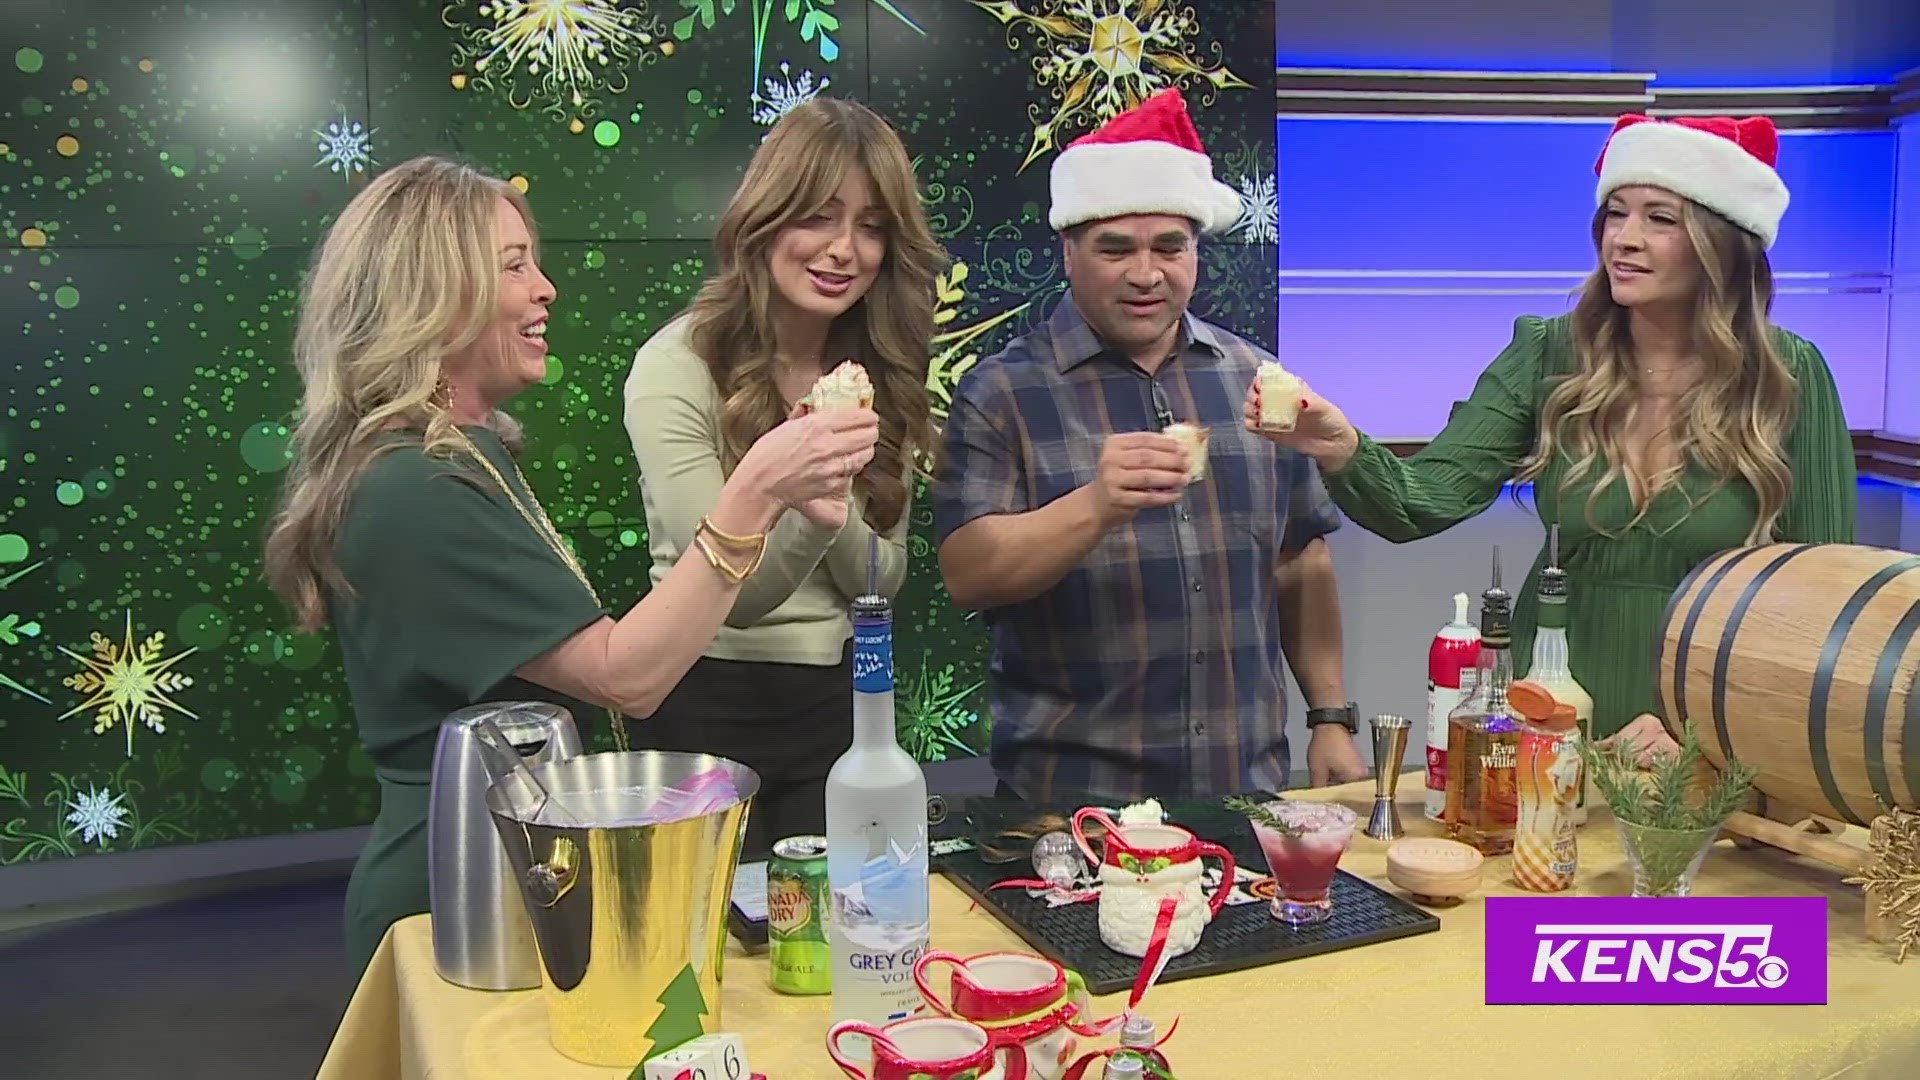 Roma & Paul help make some festive holiday drinks with That Place on Blanco.